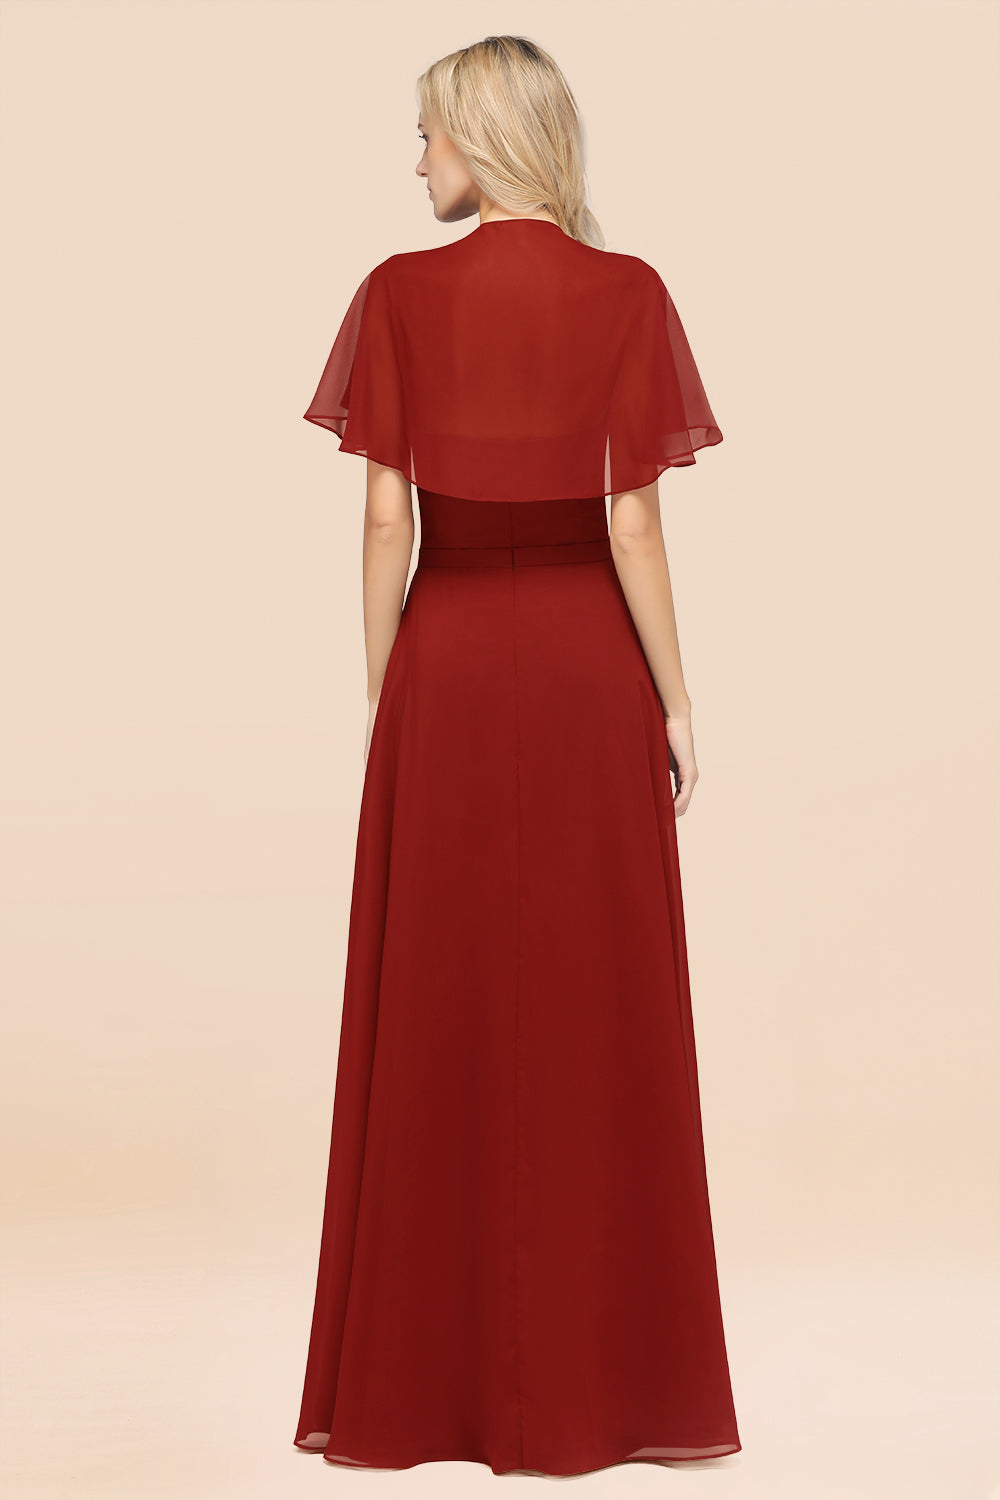 Load image into Gallery viewer, Chic Satin V-Neck Long Burgundy Chiffon Bridesmaid Dress with Flutter Sleeve-27dress
